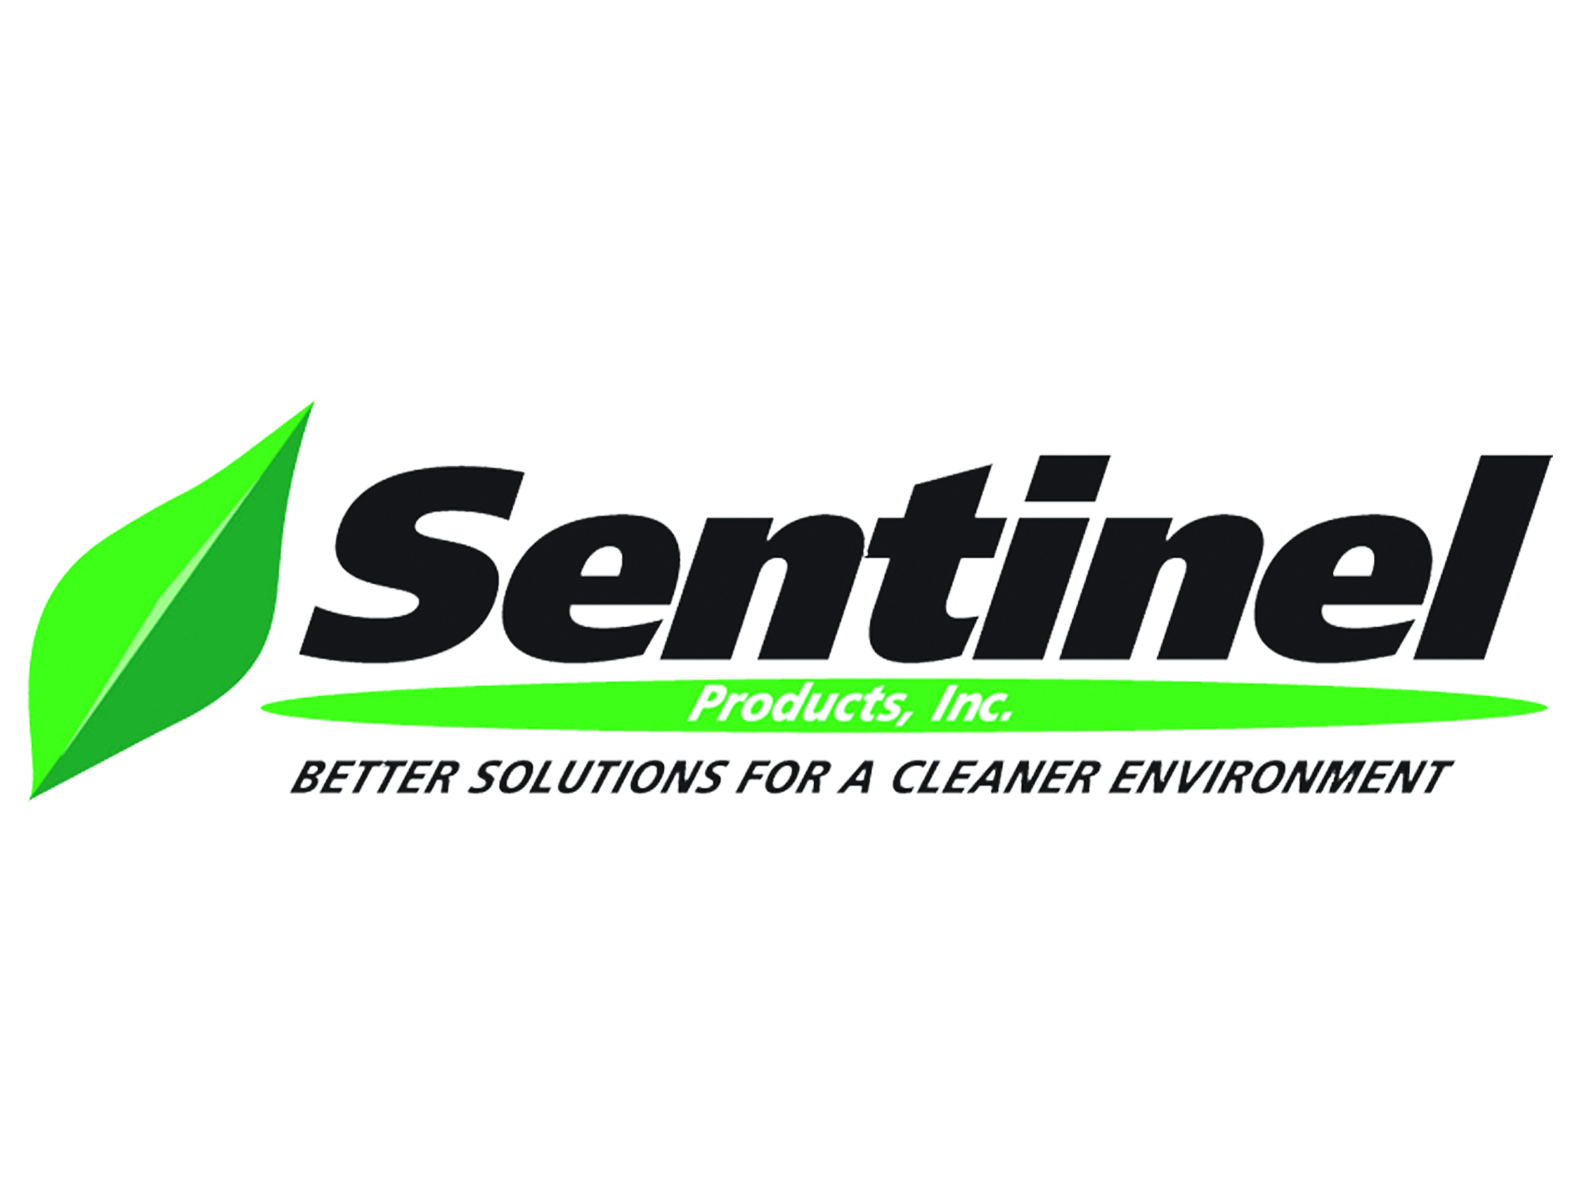 Sentinel 717 Thickened Mastic Remover Gel